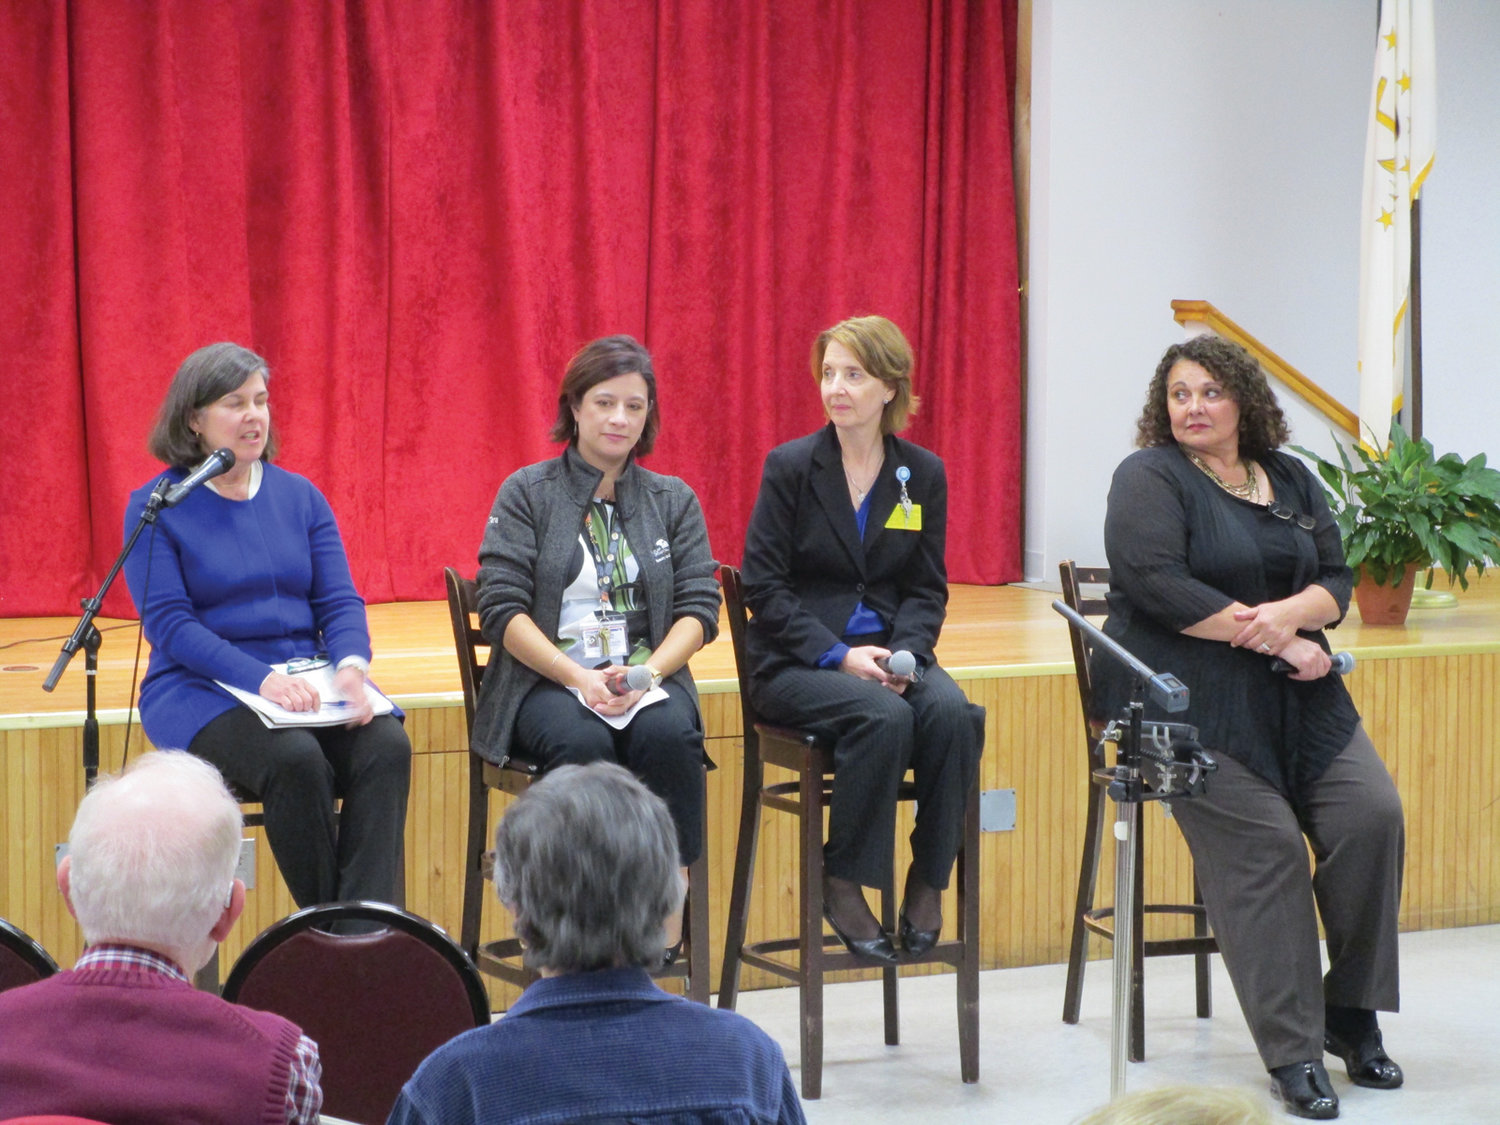 RI RESEARCH: Catherine Taylor, left, served as moderator of last week’s “Alzheimer’s Disease: Finding Hope Through Research” discussion at the Cranston Enrichment Center. Panelists, from left, were Tara Tang, Terry Fogerty and Anne Cerullo.